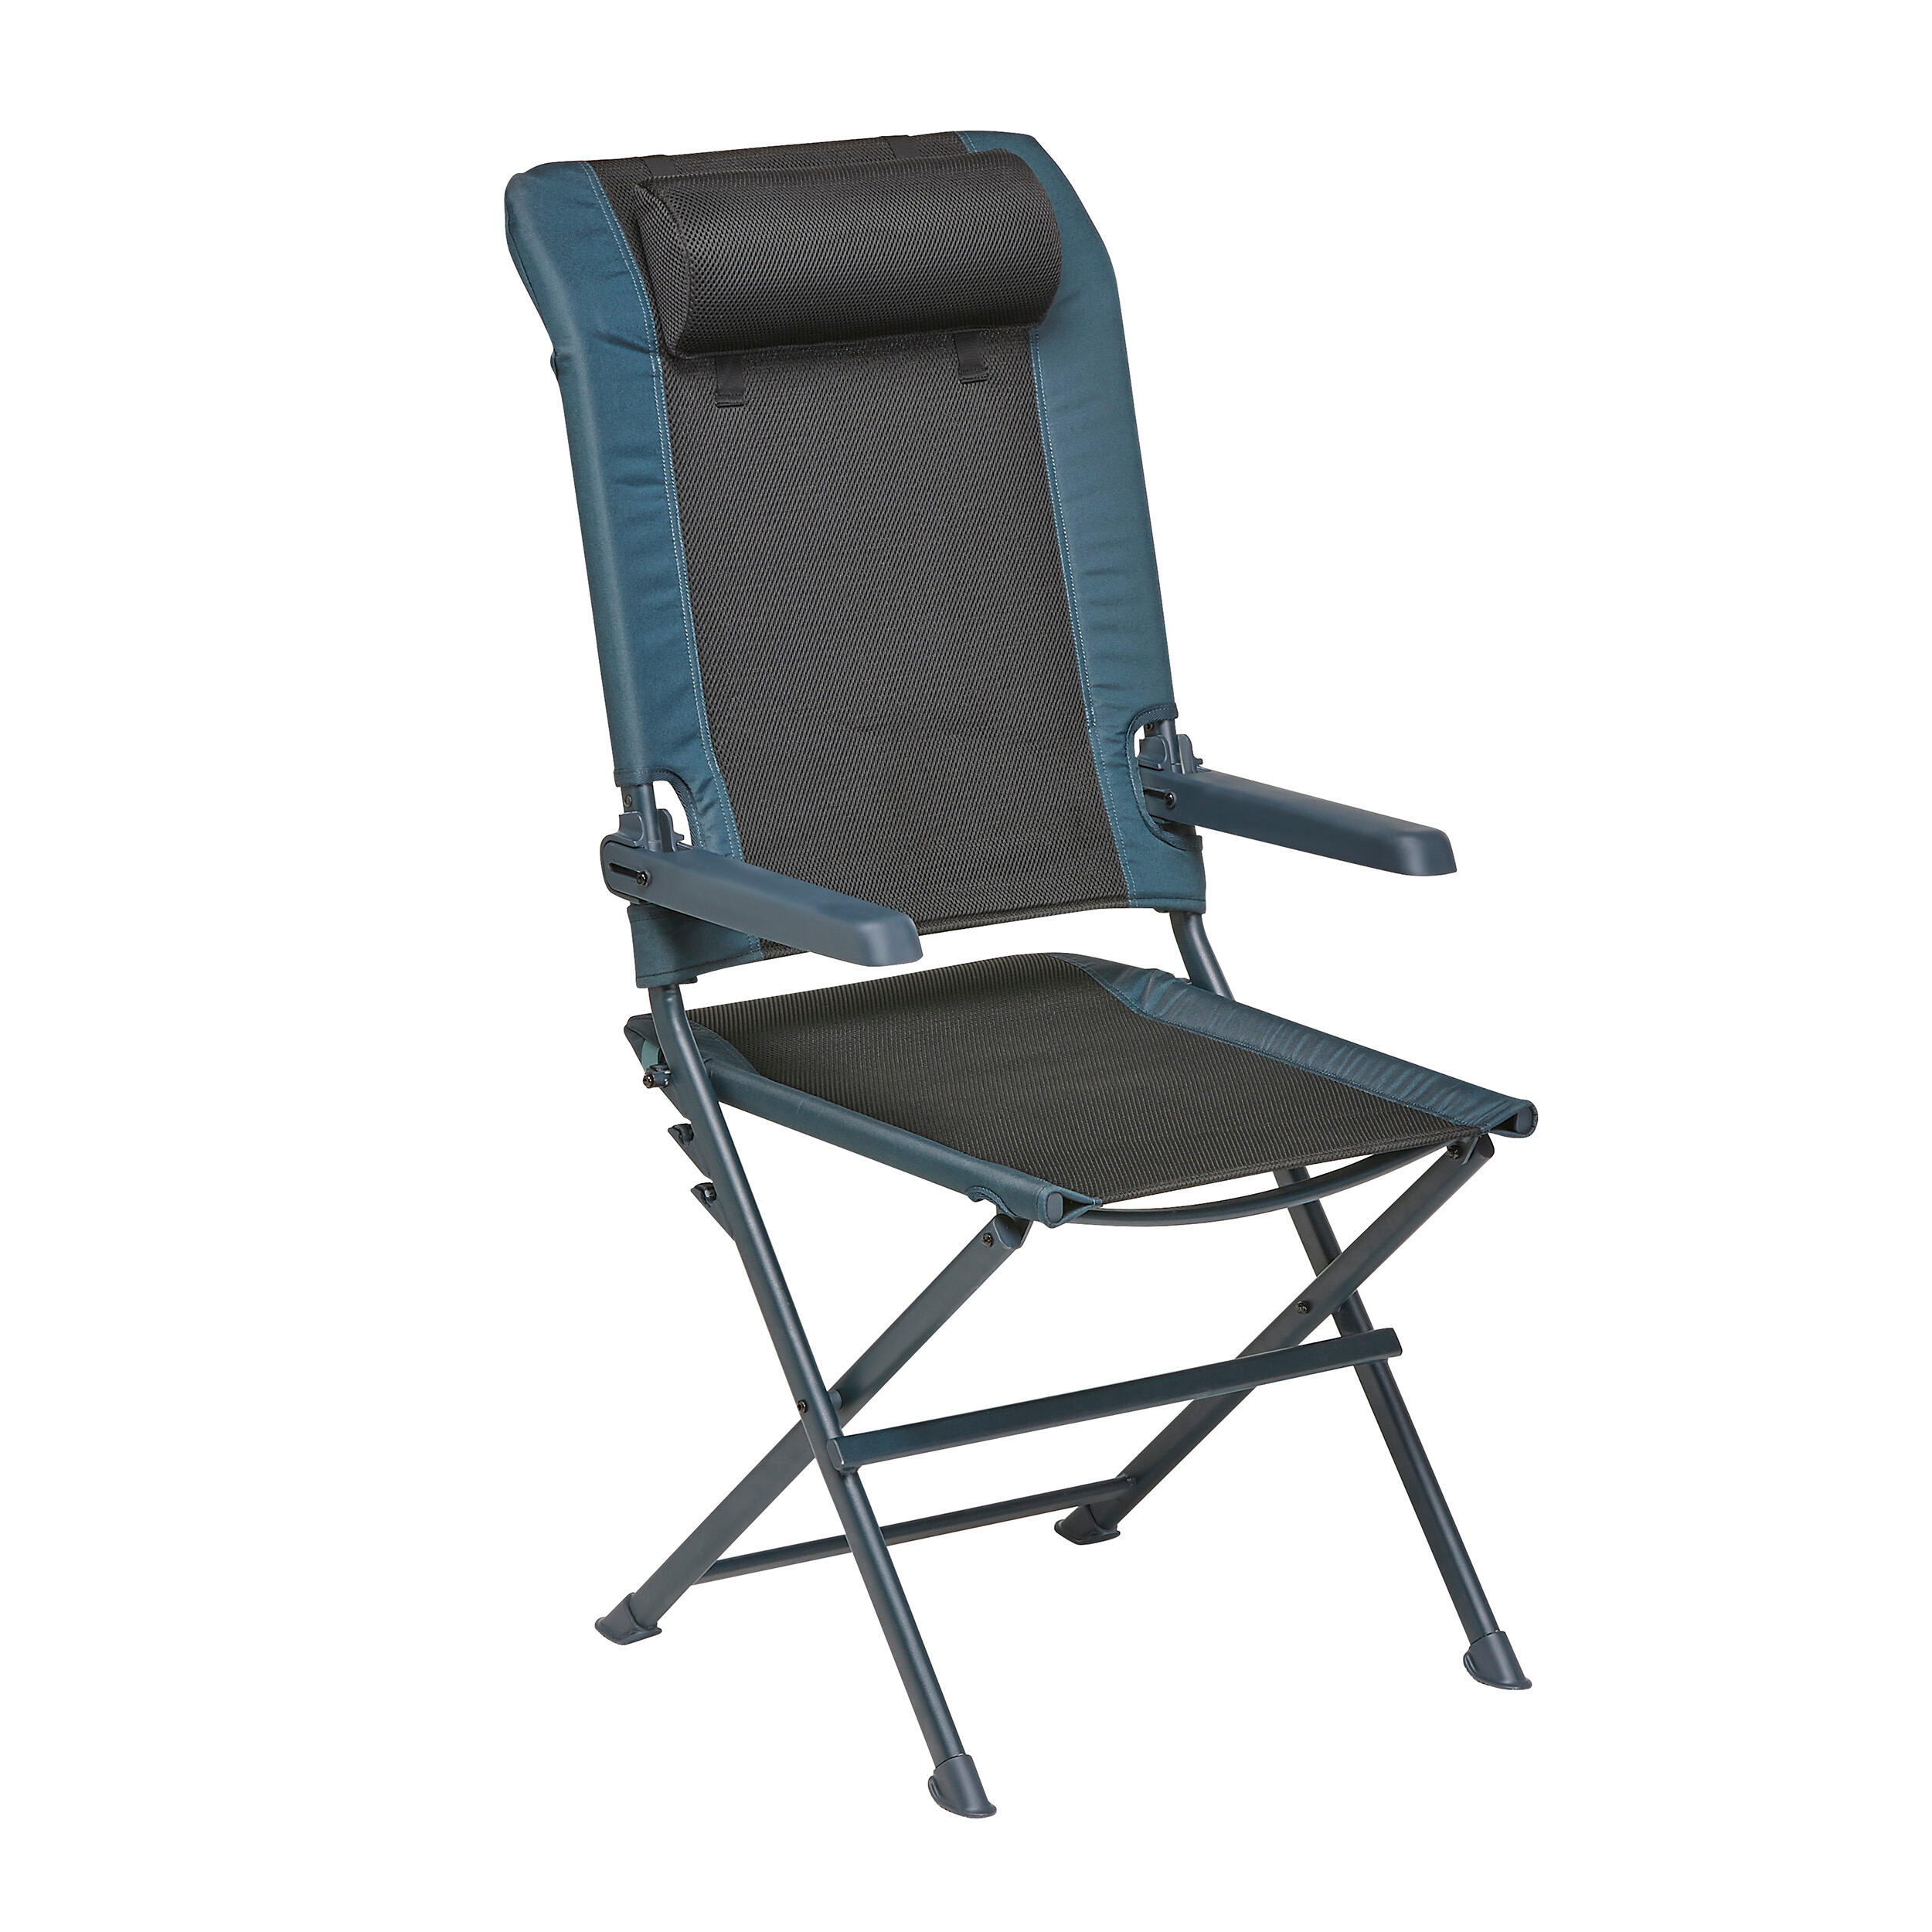 QUECHUA Multi-position comfortable camping armchair - Chill Meal